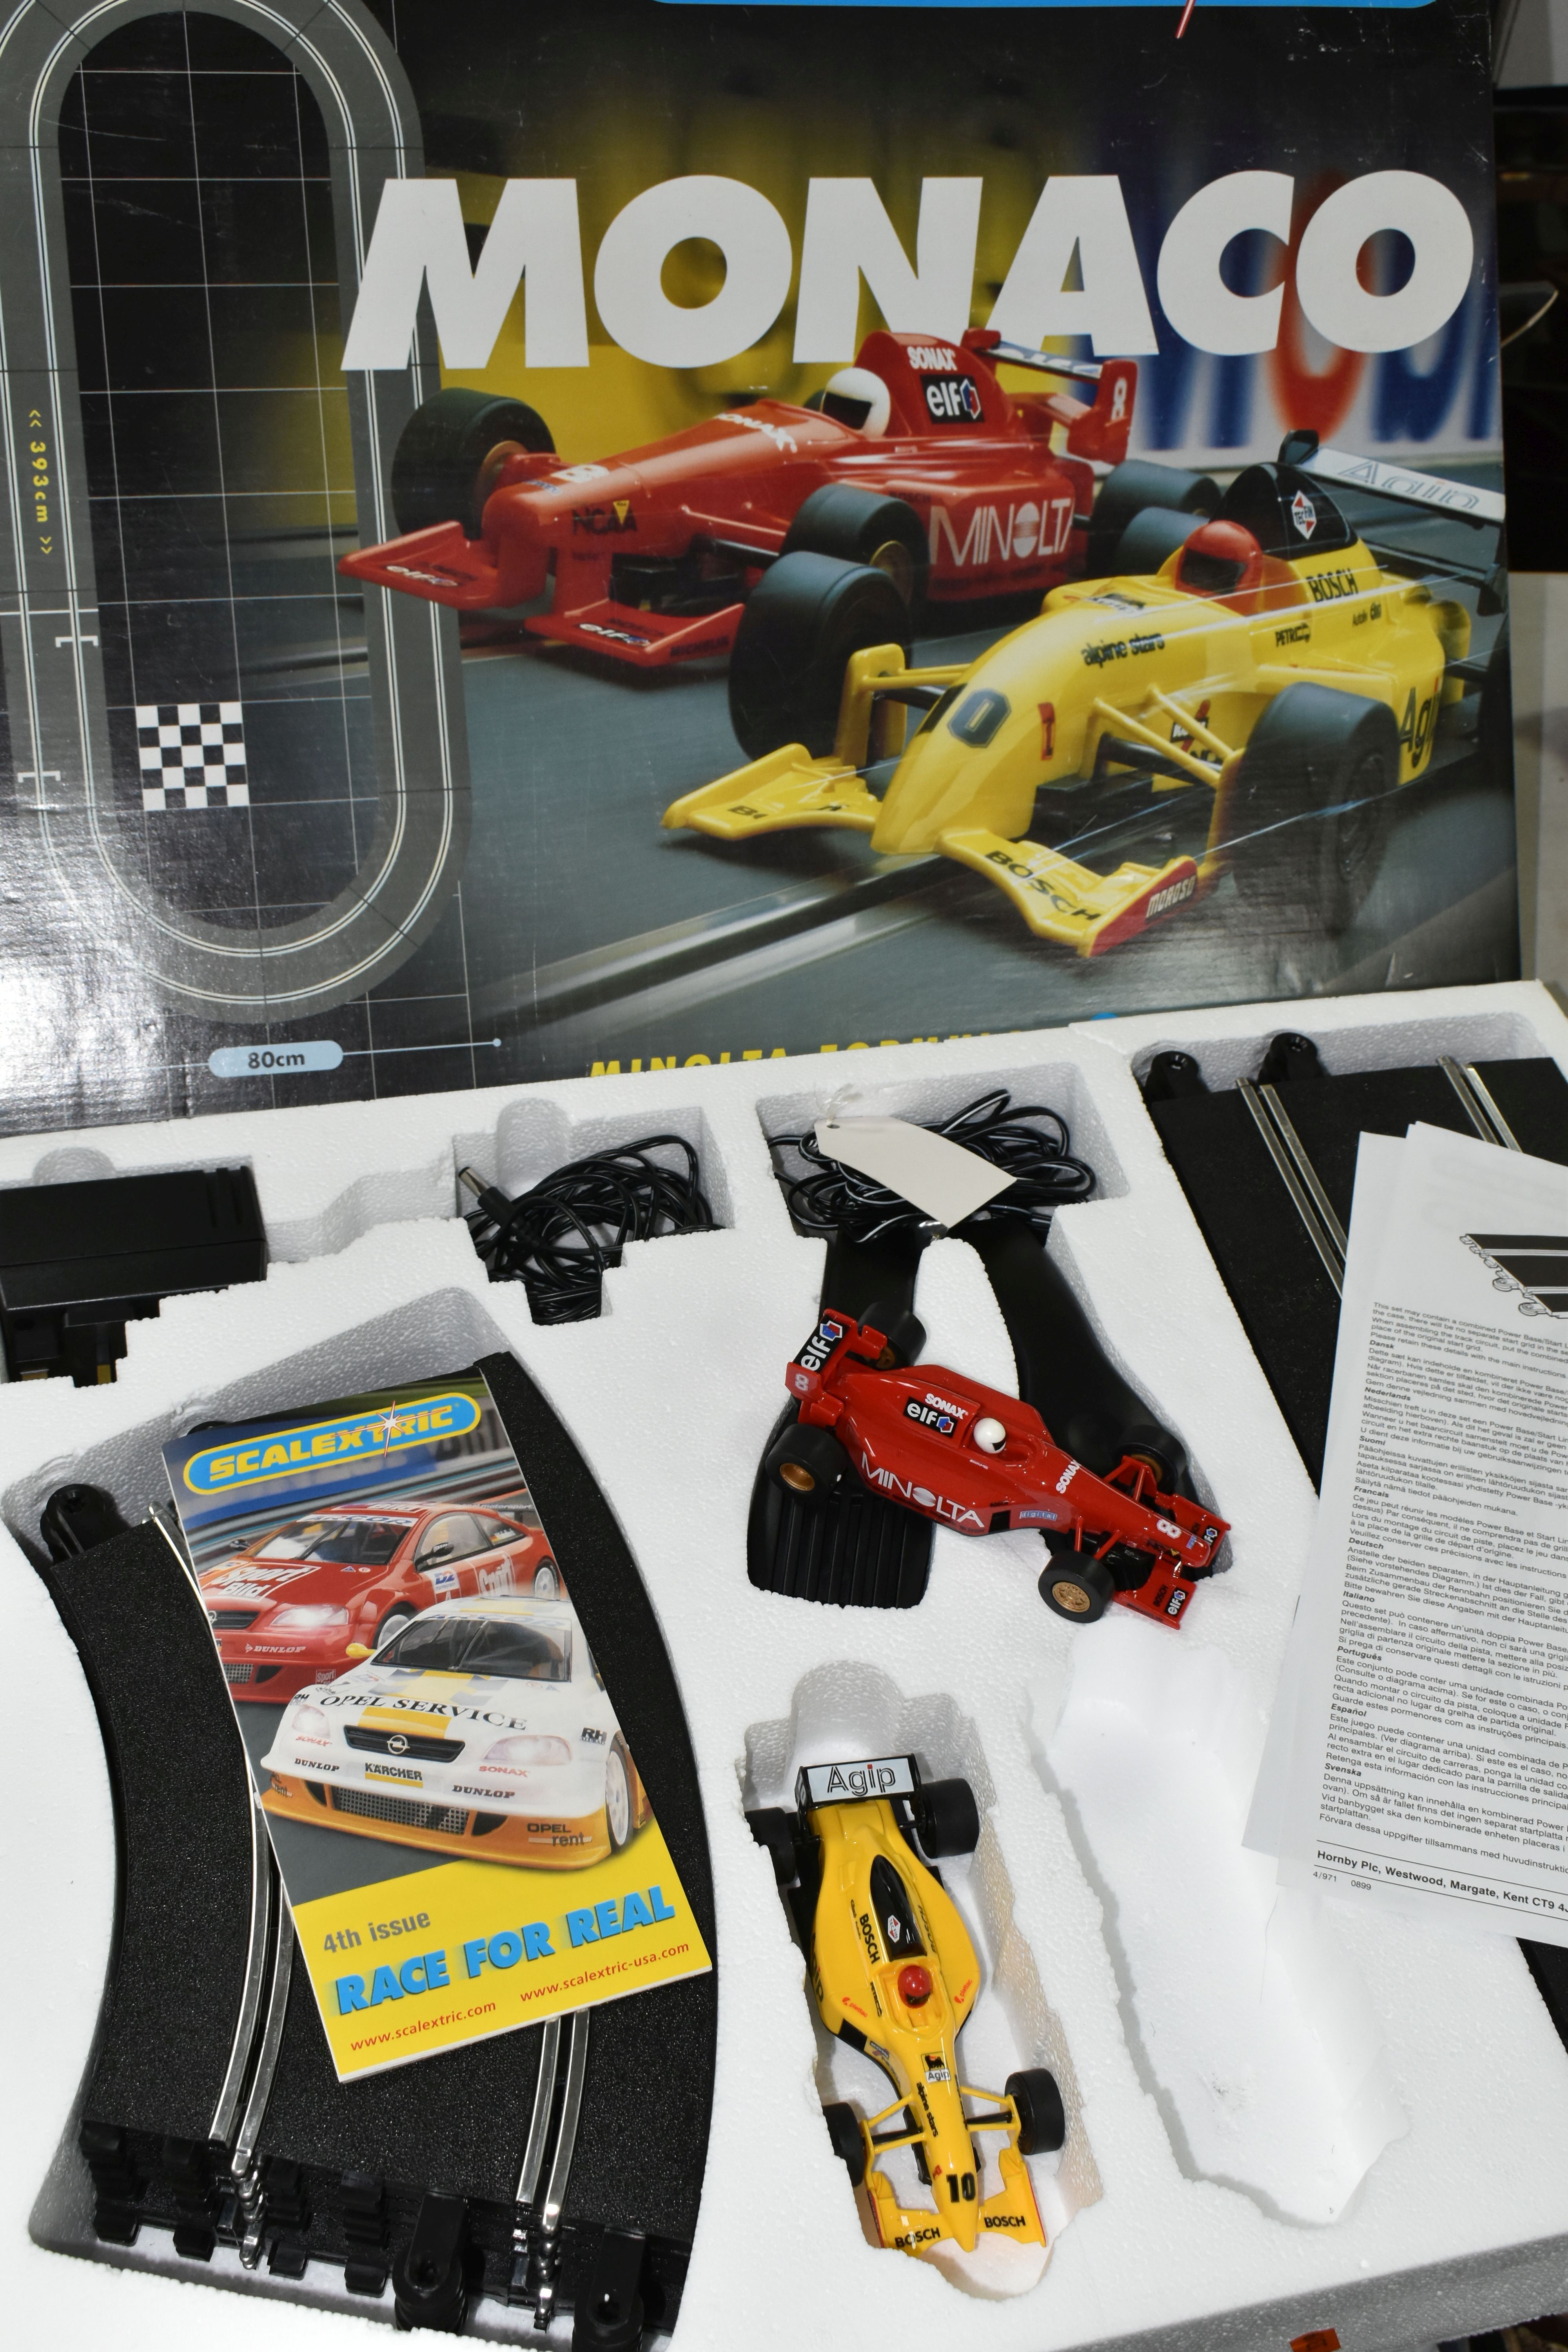 A BOXED SCALEXTRIC MONACO SET, No.C1046, appears complete and in very good condition, looks to - Image 3 of 4